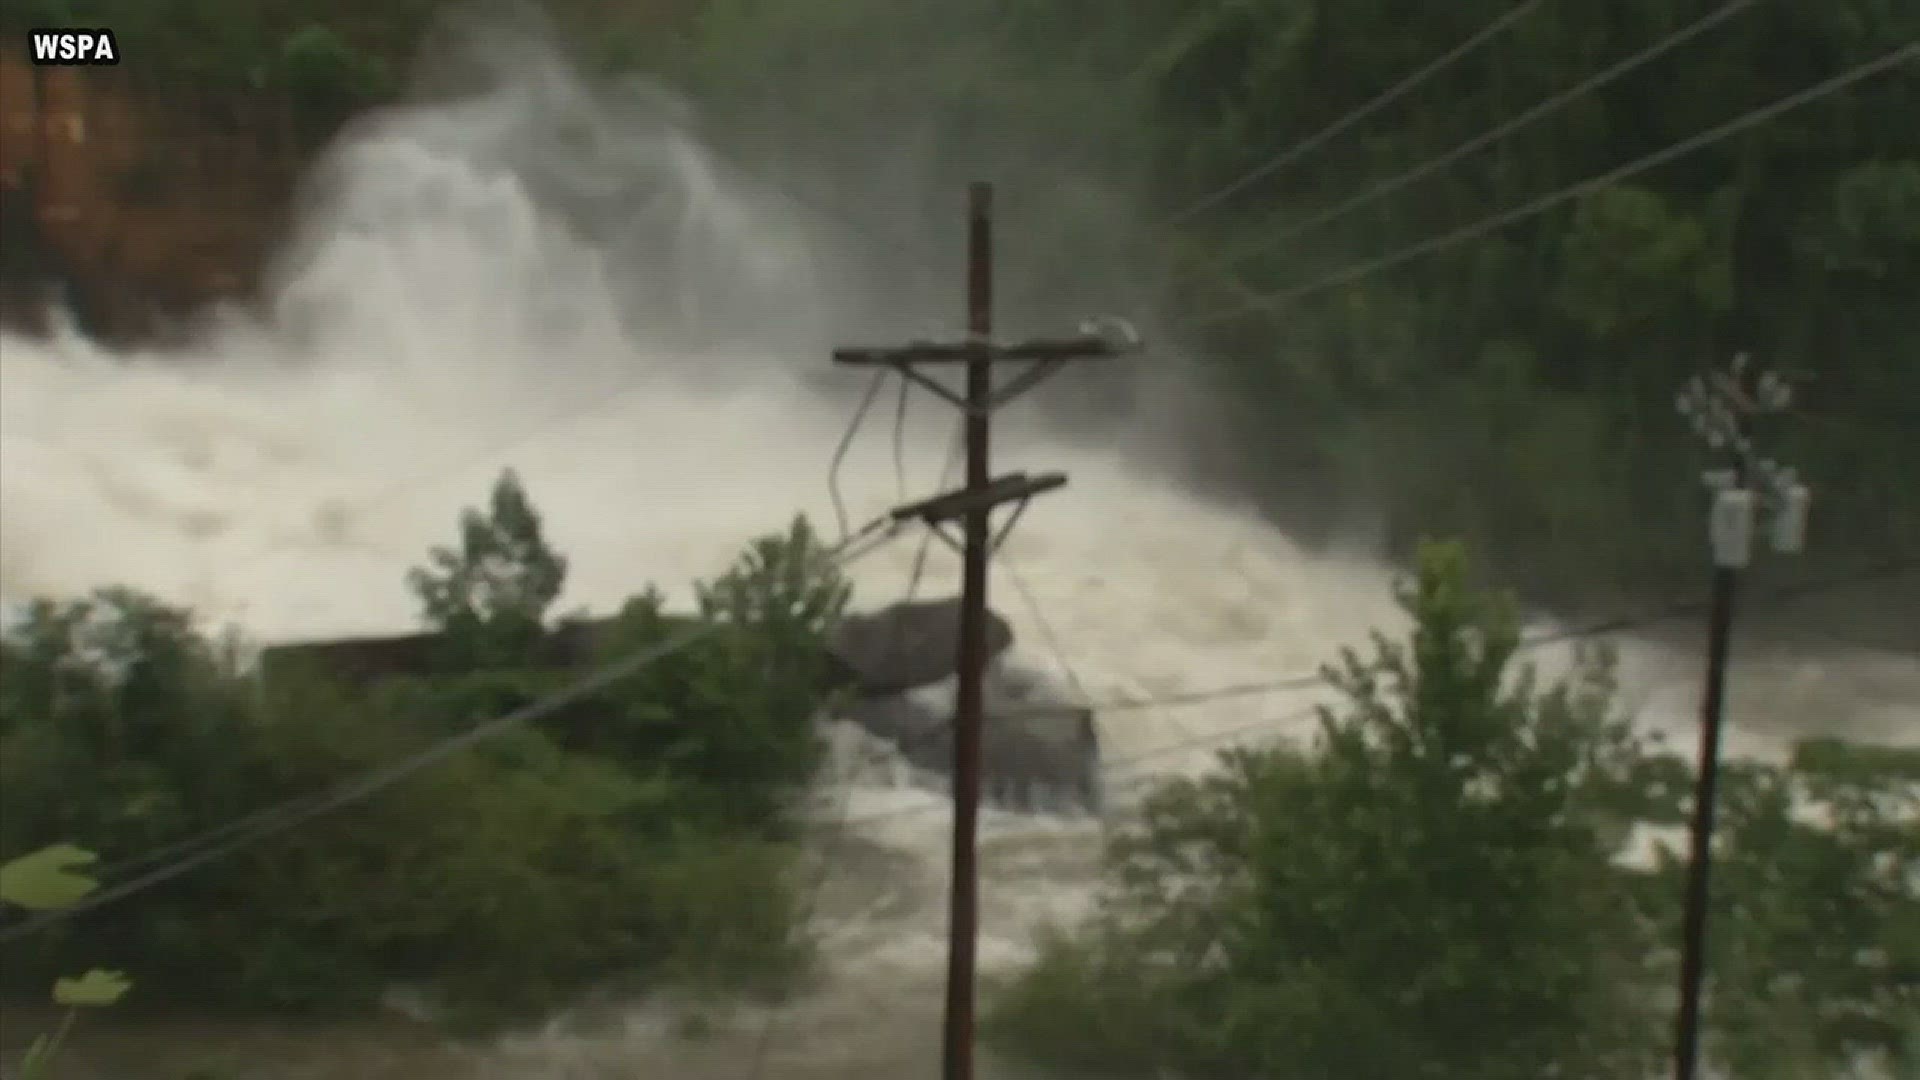 Crews release water at Lake Lure Dam to help prevent flooding